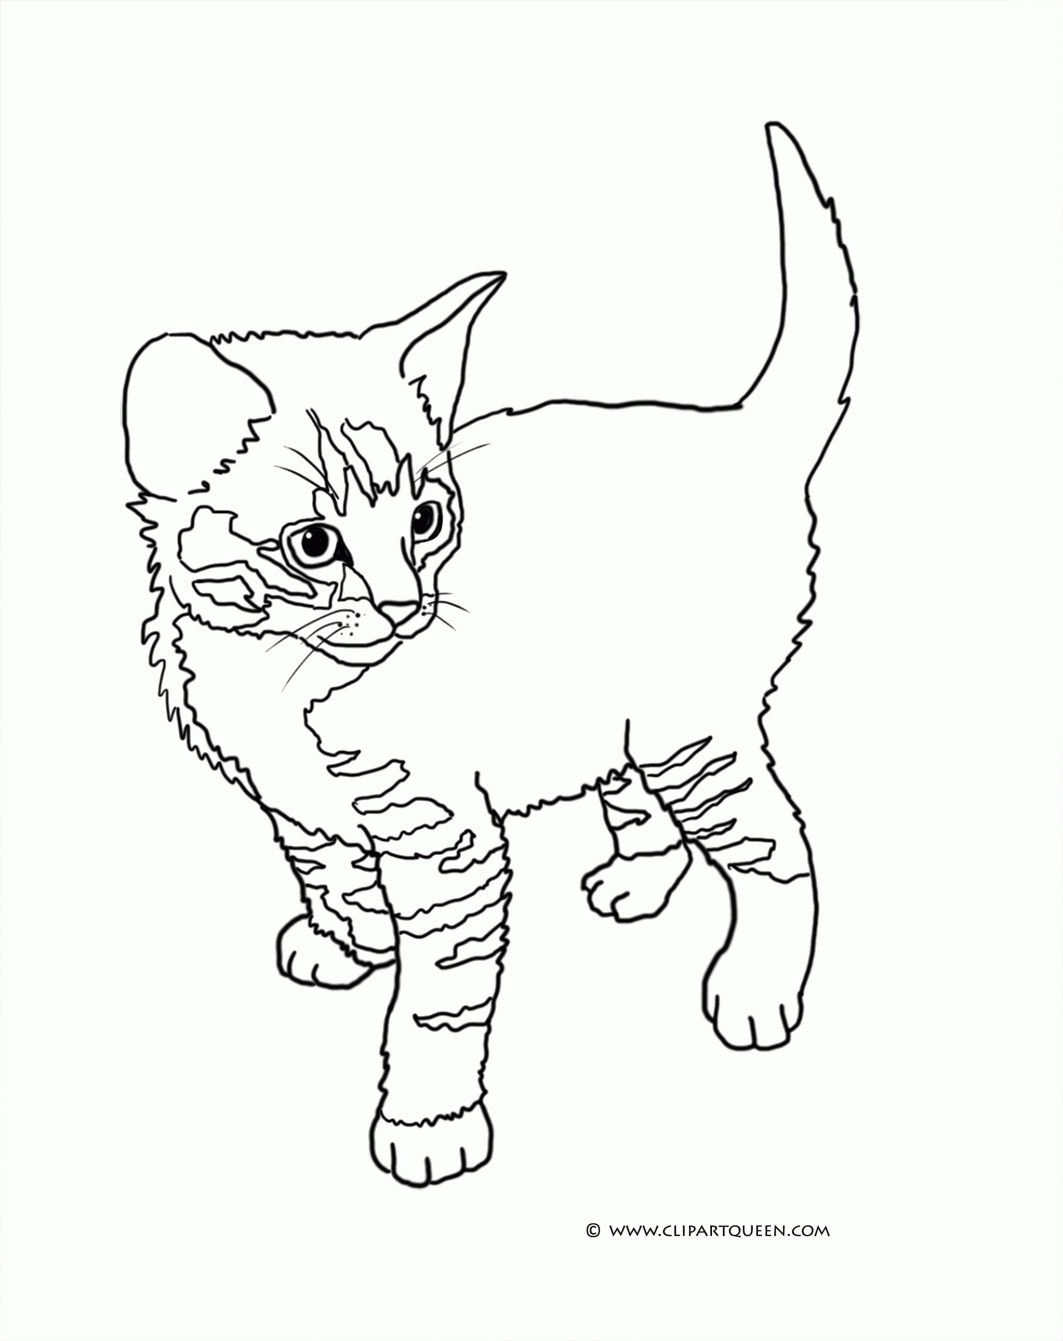 9 Pics of Tabby Cat Coloring Pages Printable - Tabby Cat Coloring ...